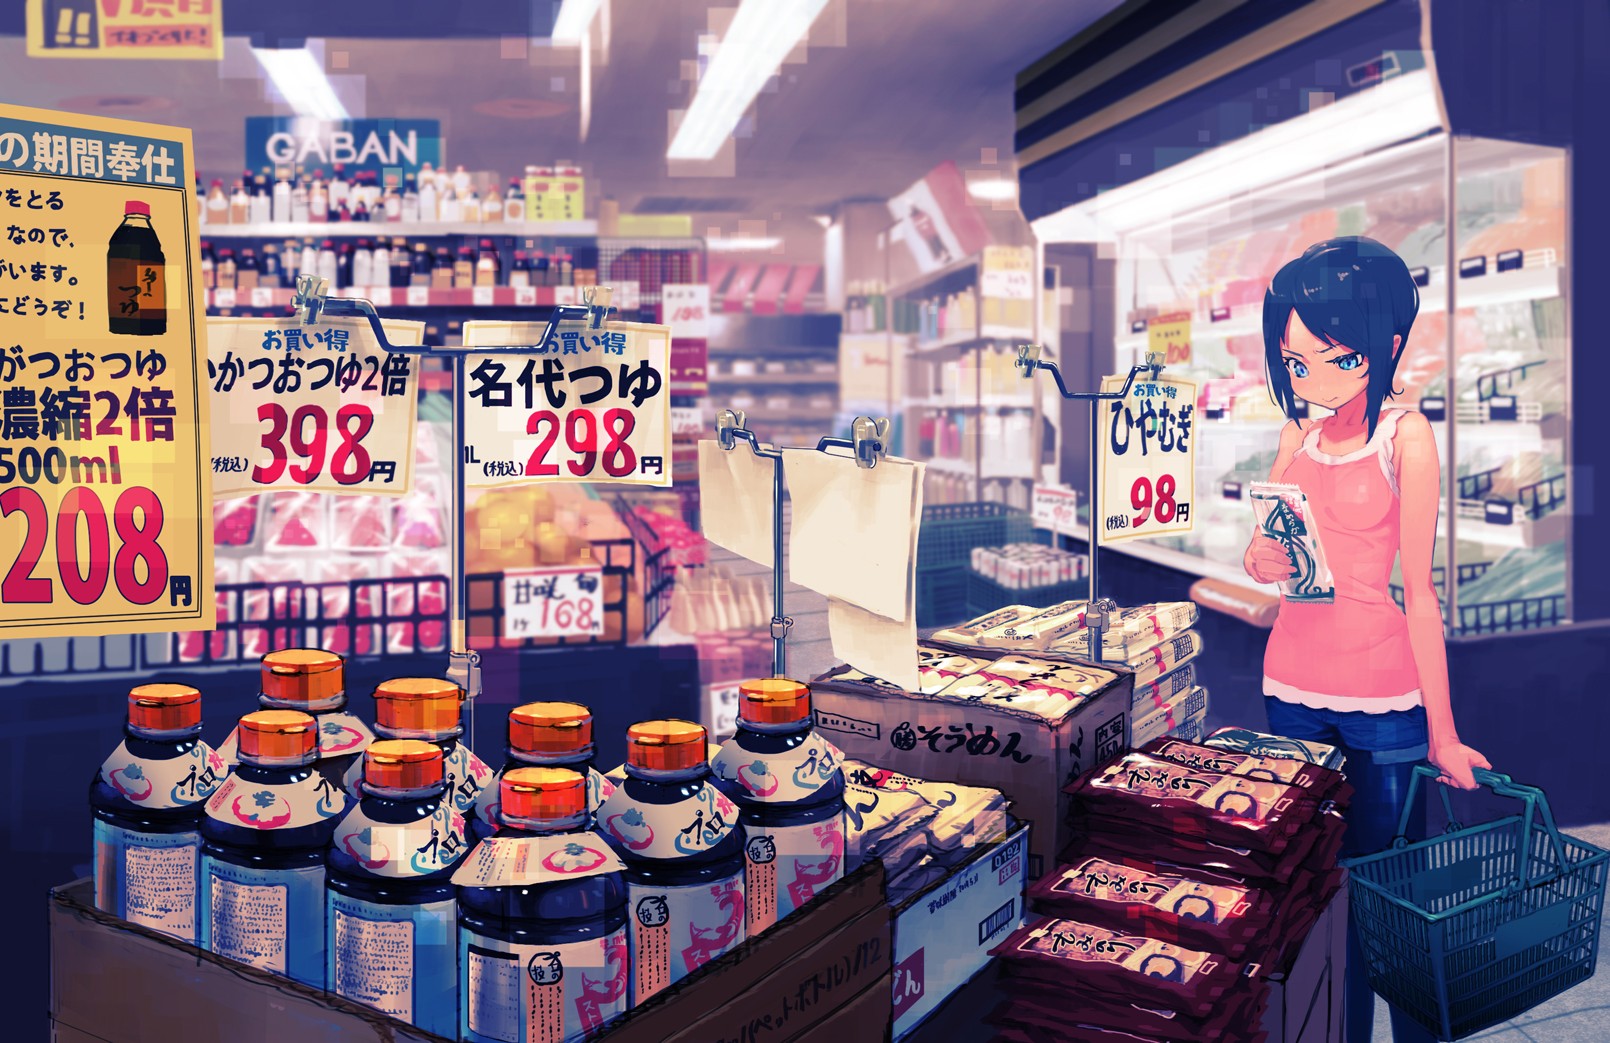 Wallpaper, Japan, anime, stores, brand, shopping, fair, retail, grocery store 1610x1043